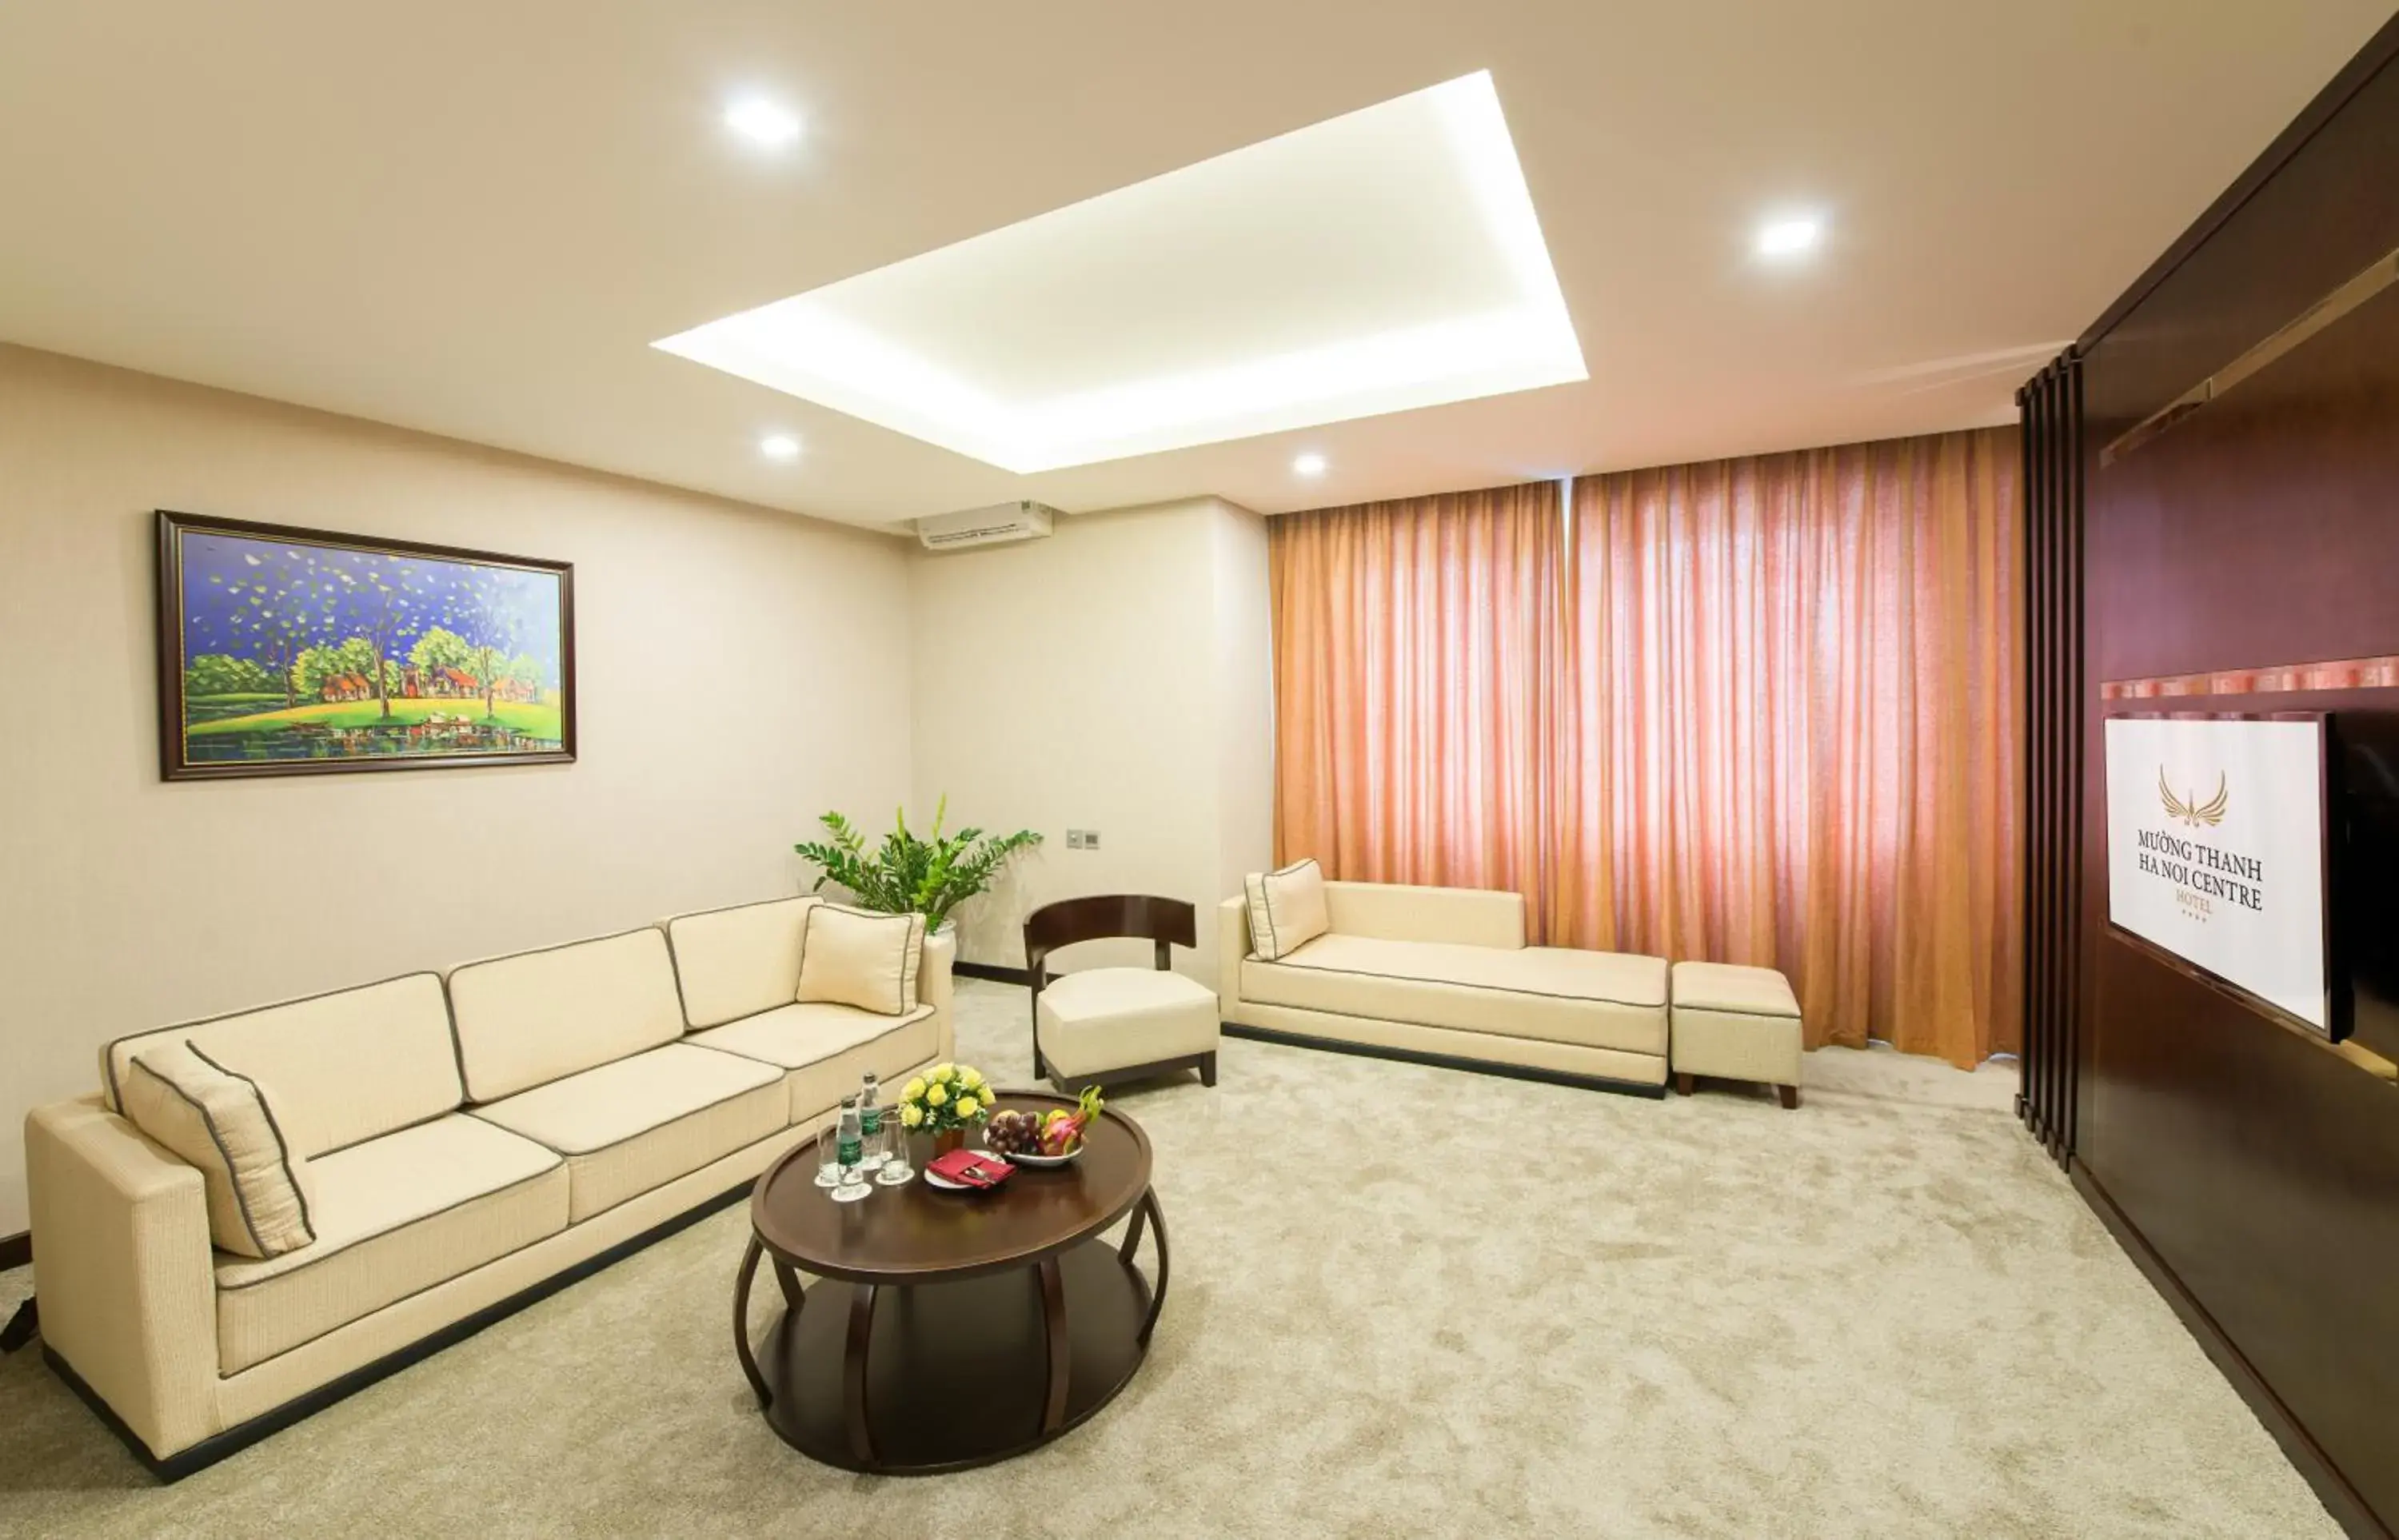 Executive Suite - single occupancy in Muong Thanh Hanoi Centre Hotel